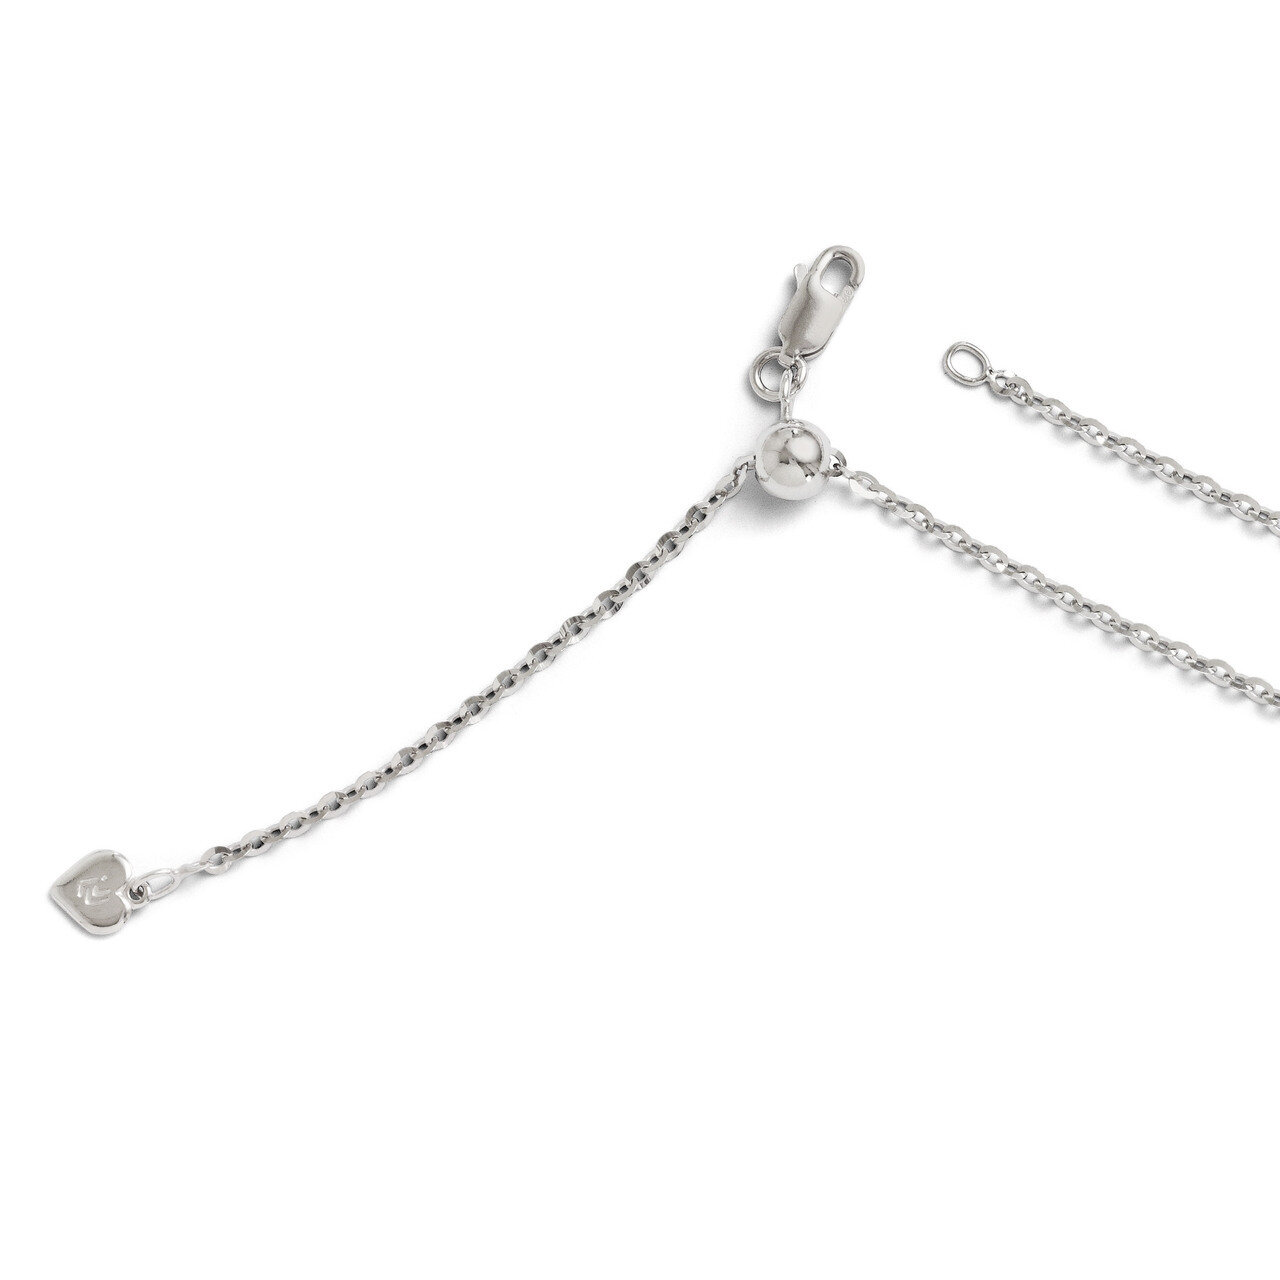 Adjustable Cable Chain 30 Inch - Sterling Silver HB-FC31-22